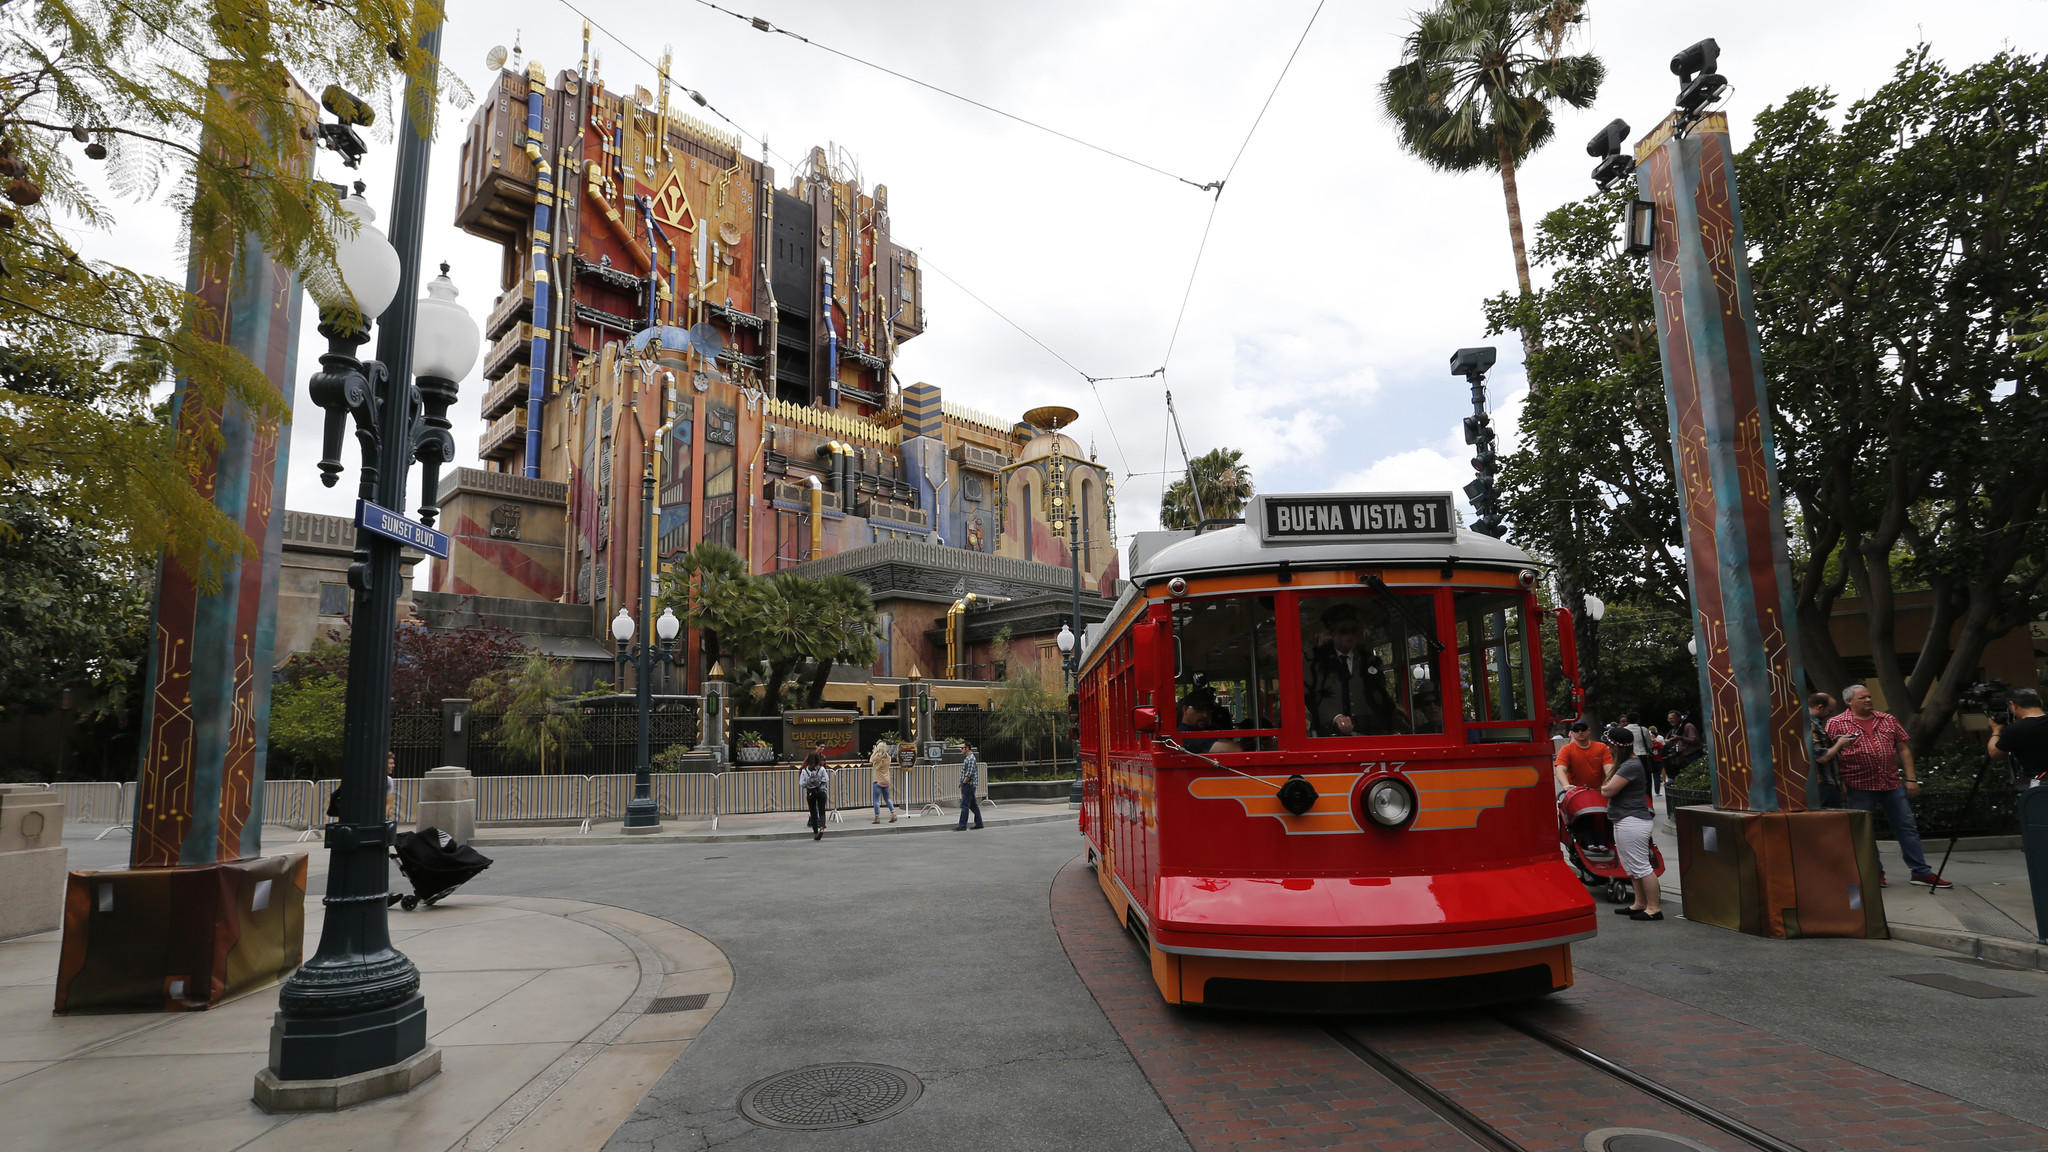 An exterior view of the Guardians of the Galaxy: Mission Breakout ride in Anaheim shortly before the crowds showed up for its May debut.